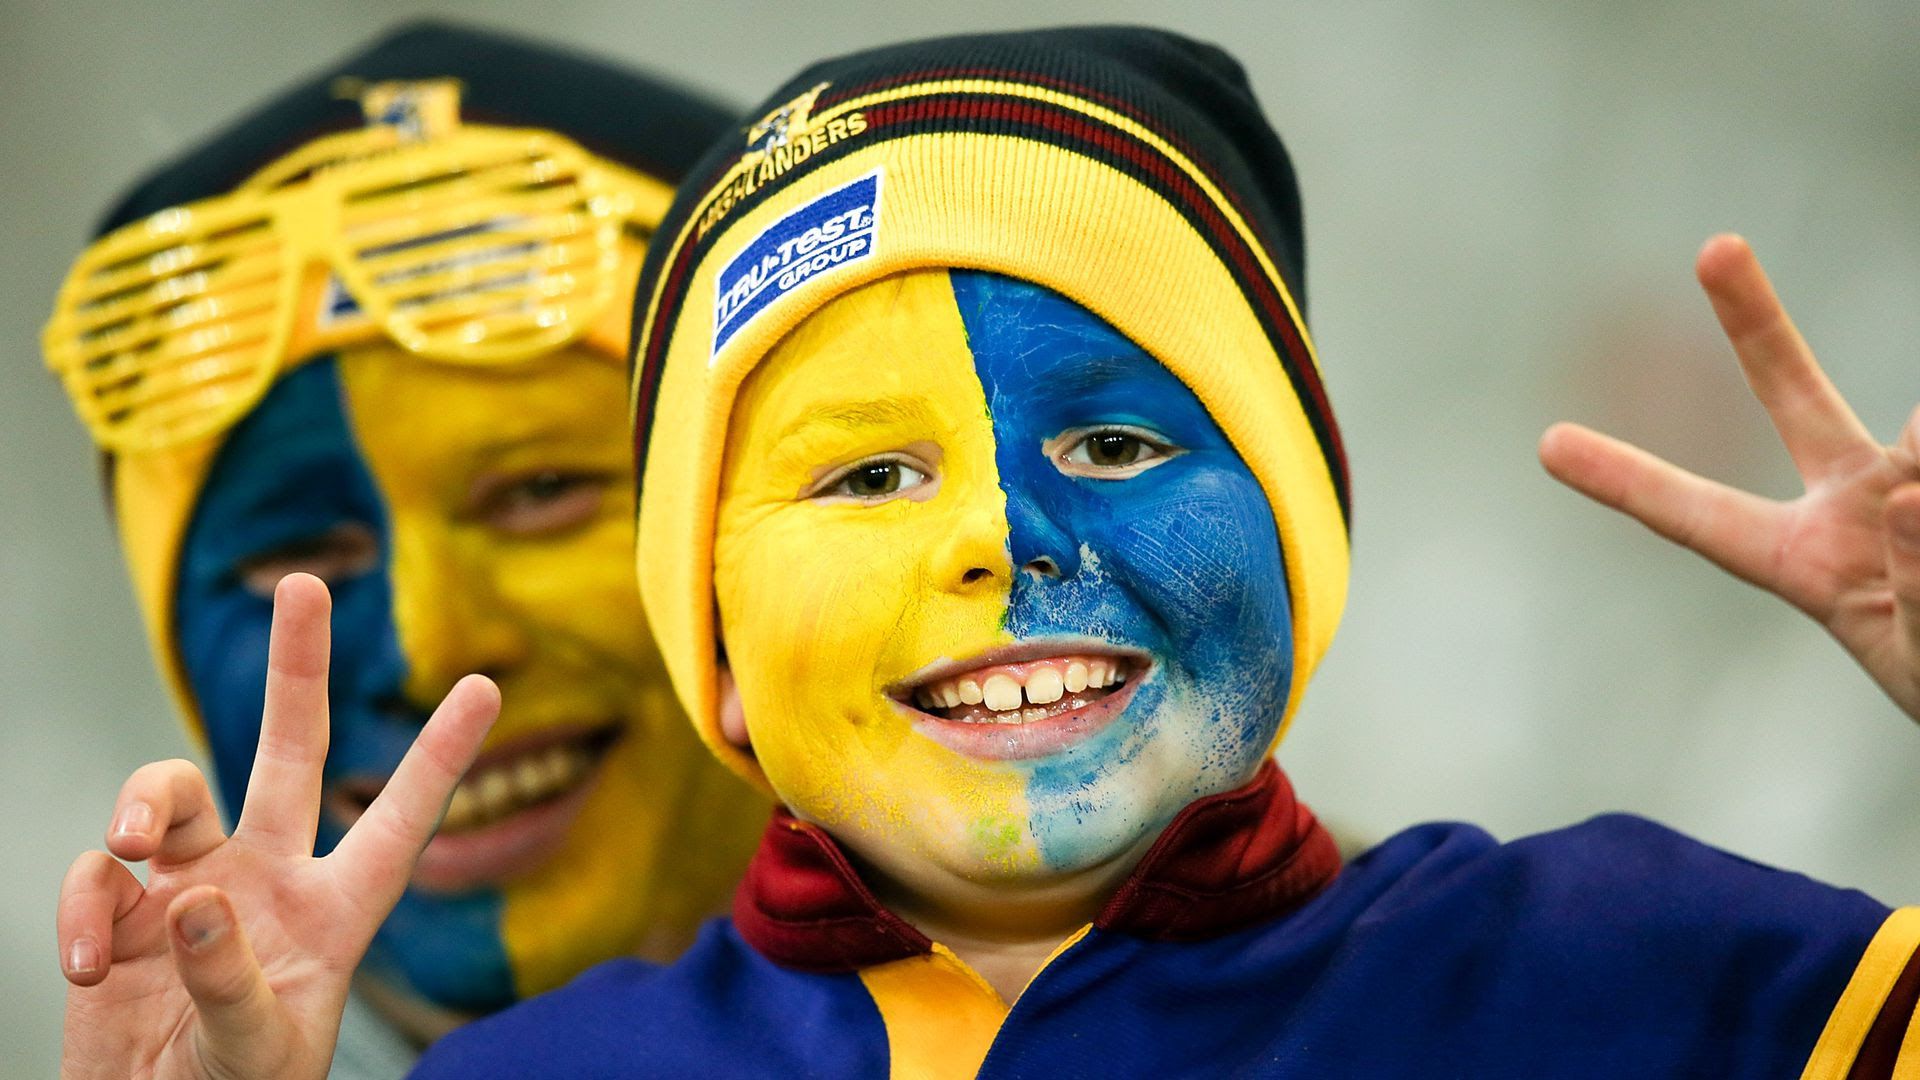 A young rugby fan has his face painted blue and yellow to support the Highlanders in New Zealand